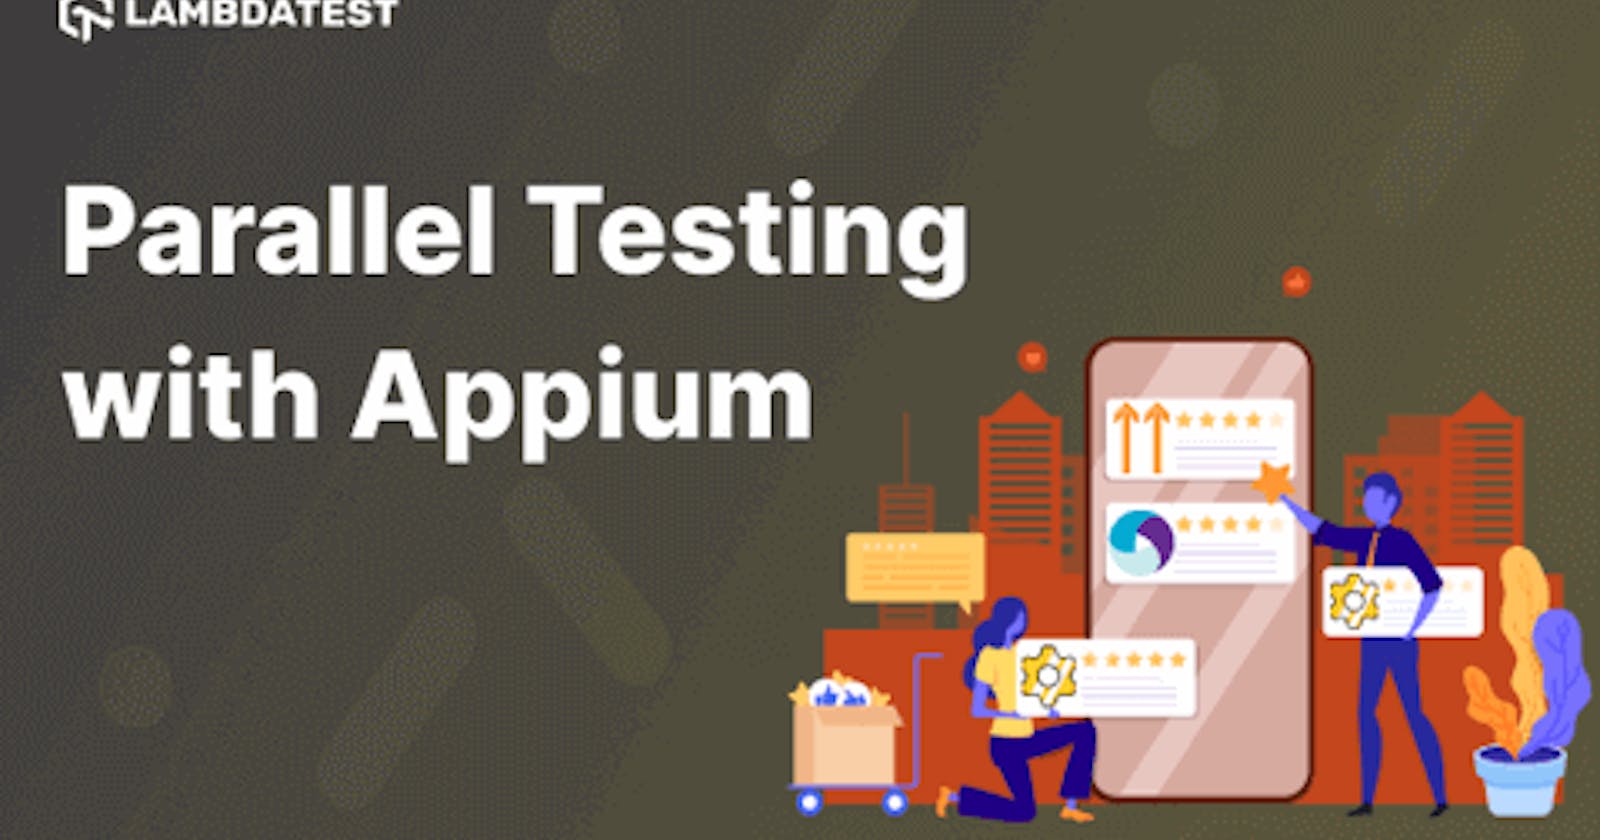 Complete Tutorial On Appium Parallel Testing [With Examples]